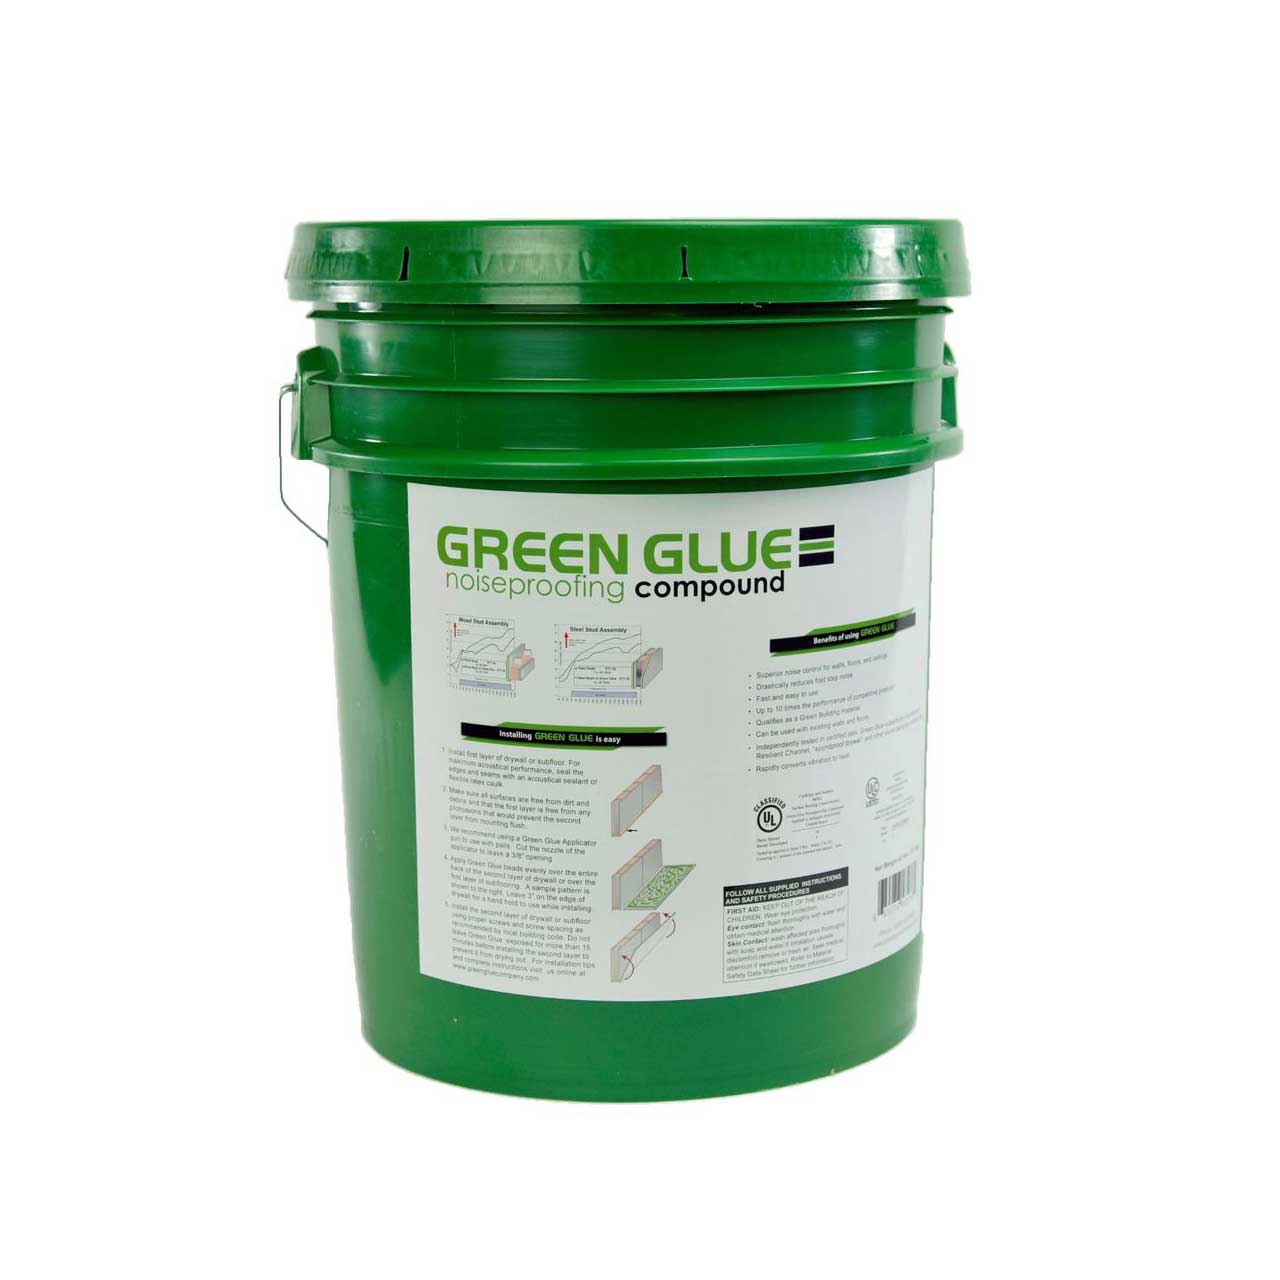 All About Green Glue Damping Compound